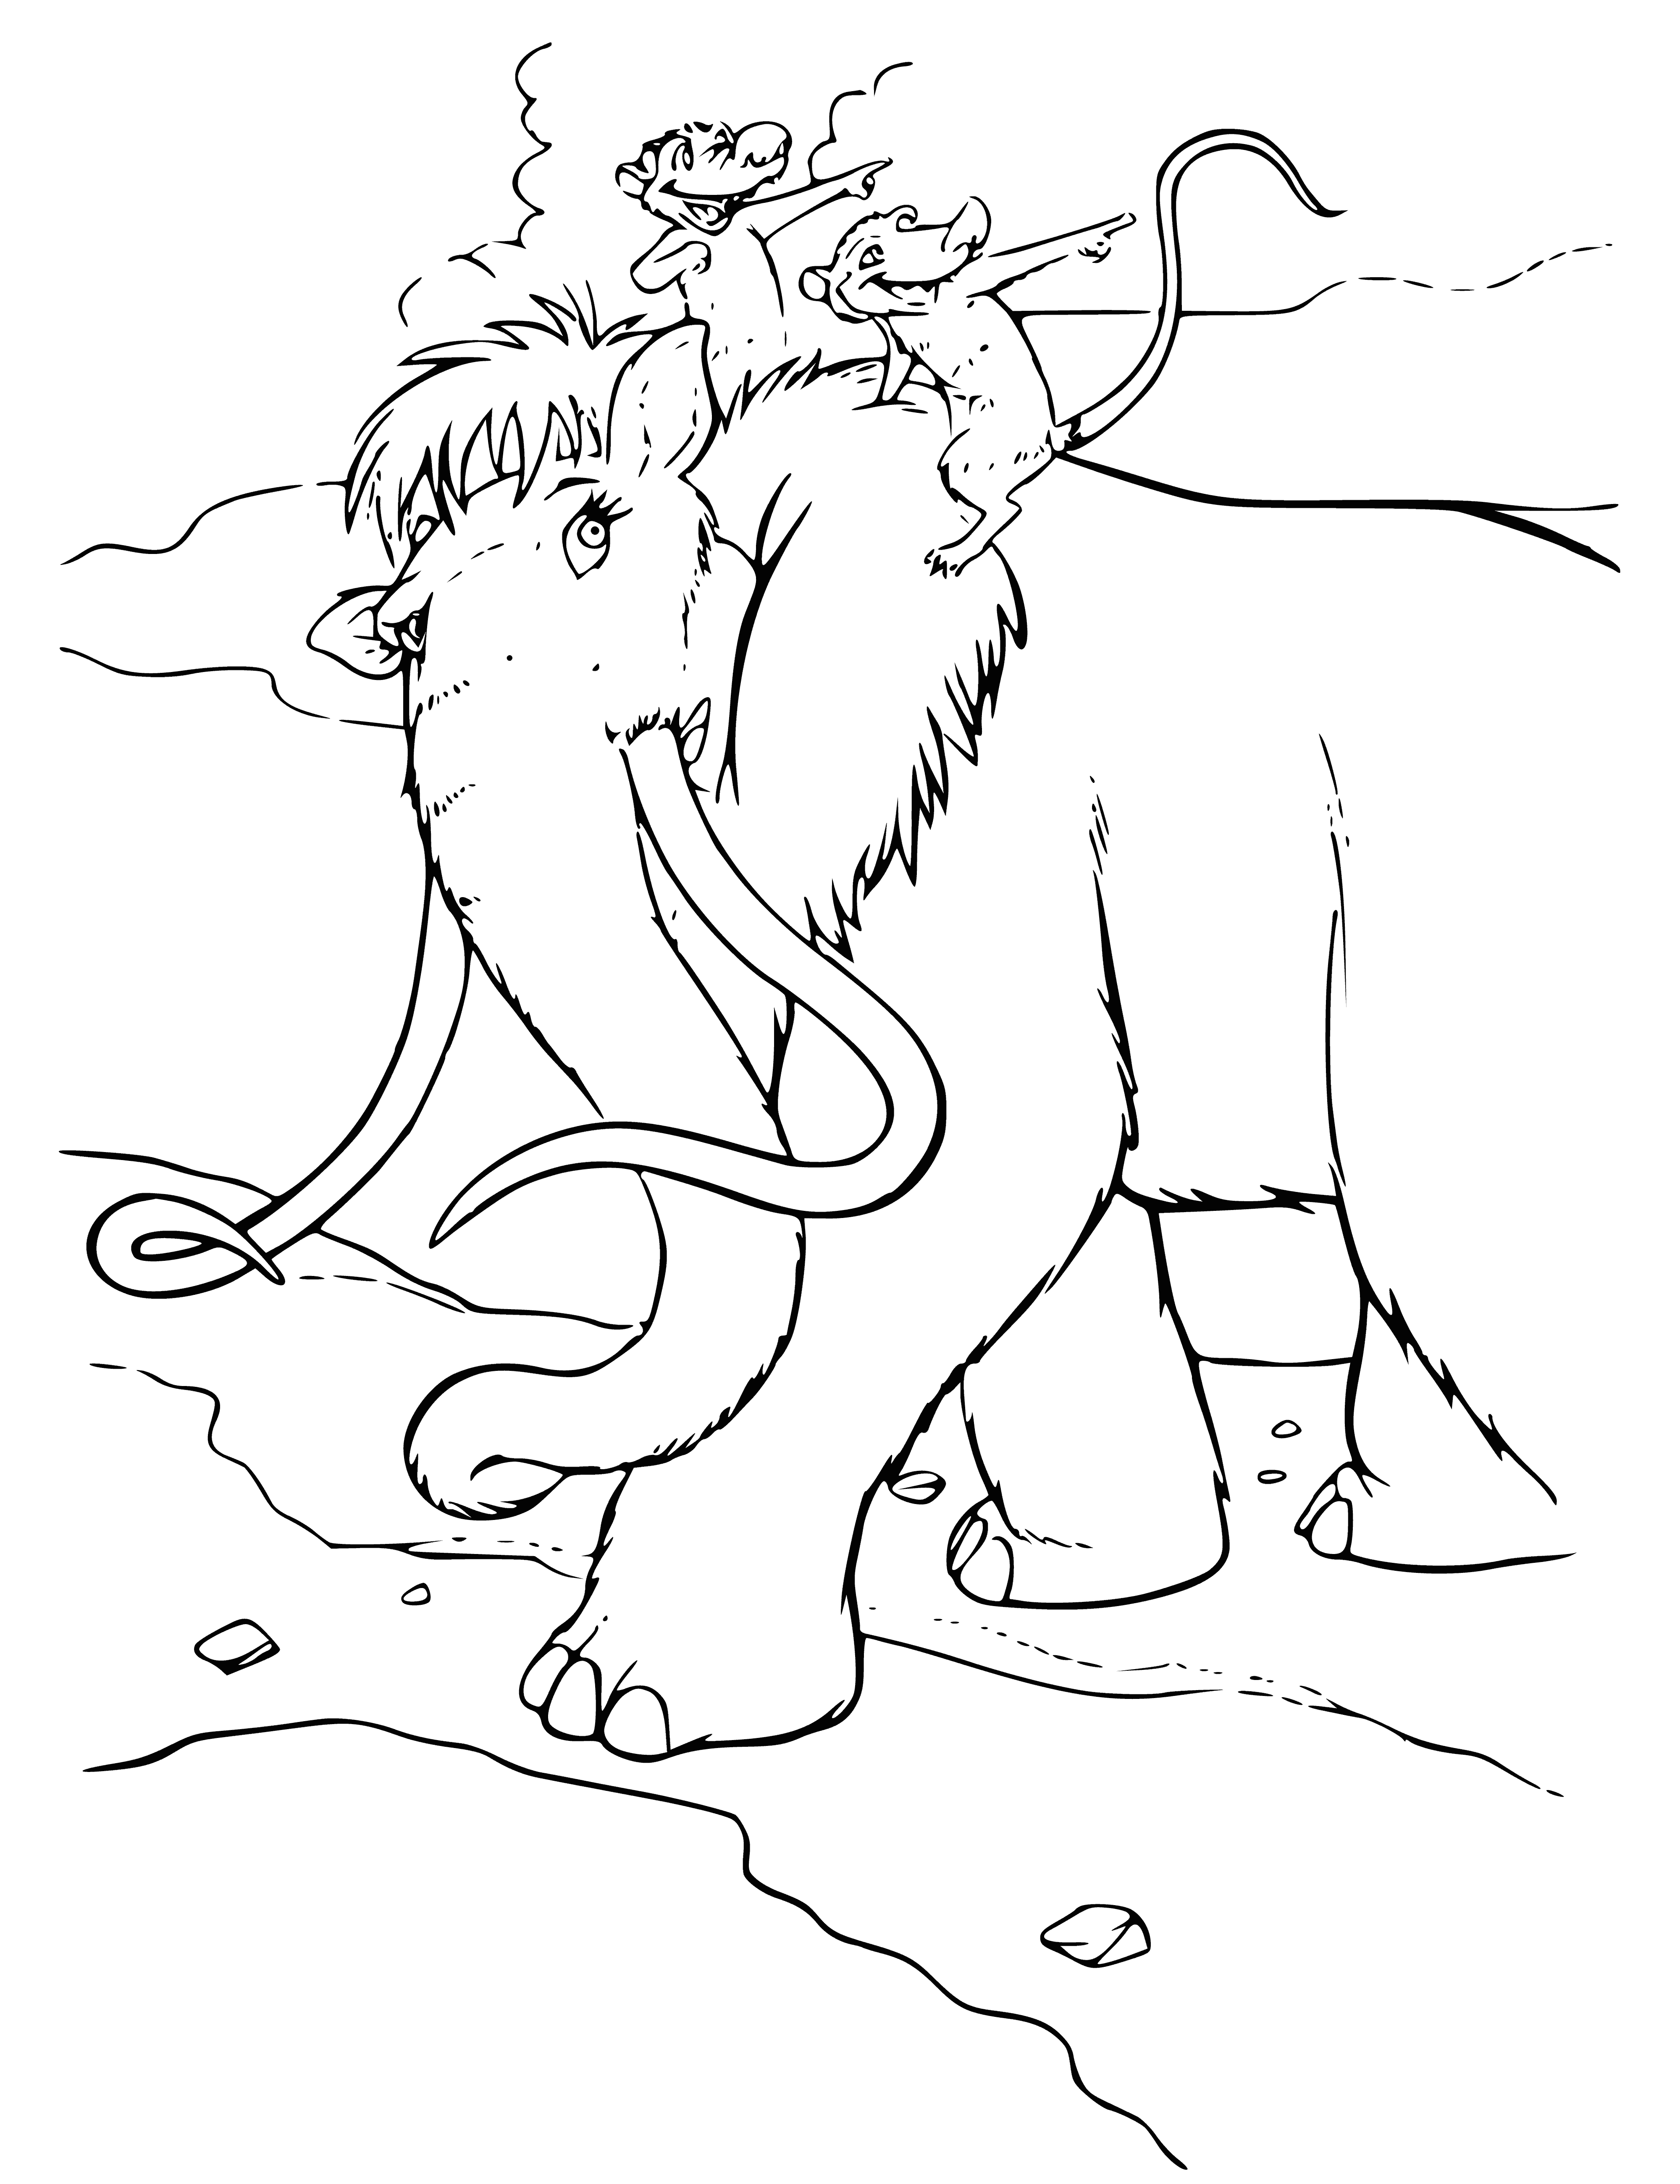 coloring page: Crash and Eddie have an exciting time riding a mammoth amid icy, snow-capped mountains.